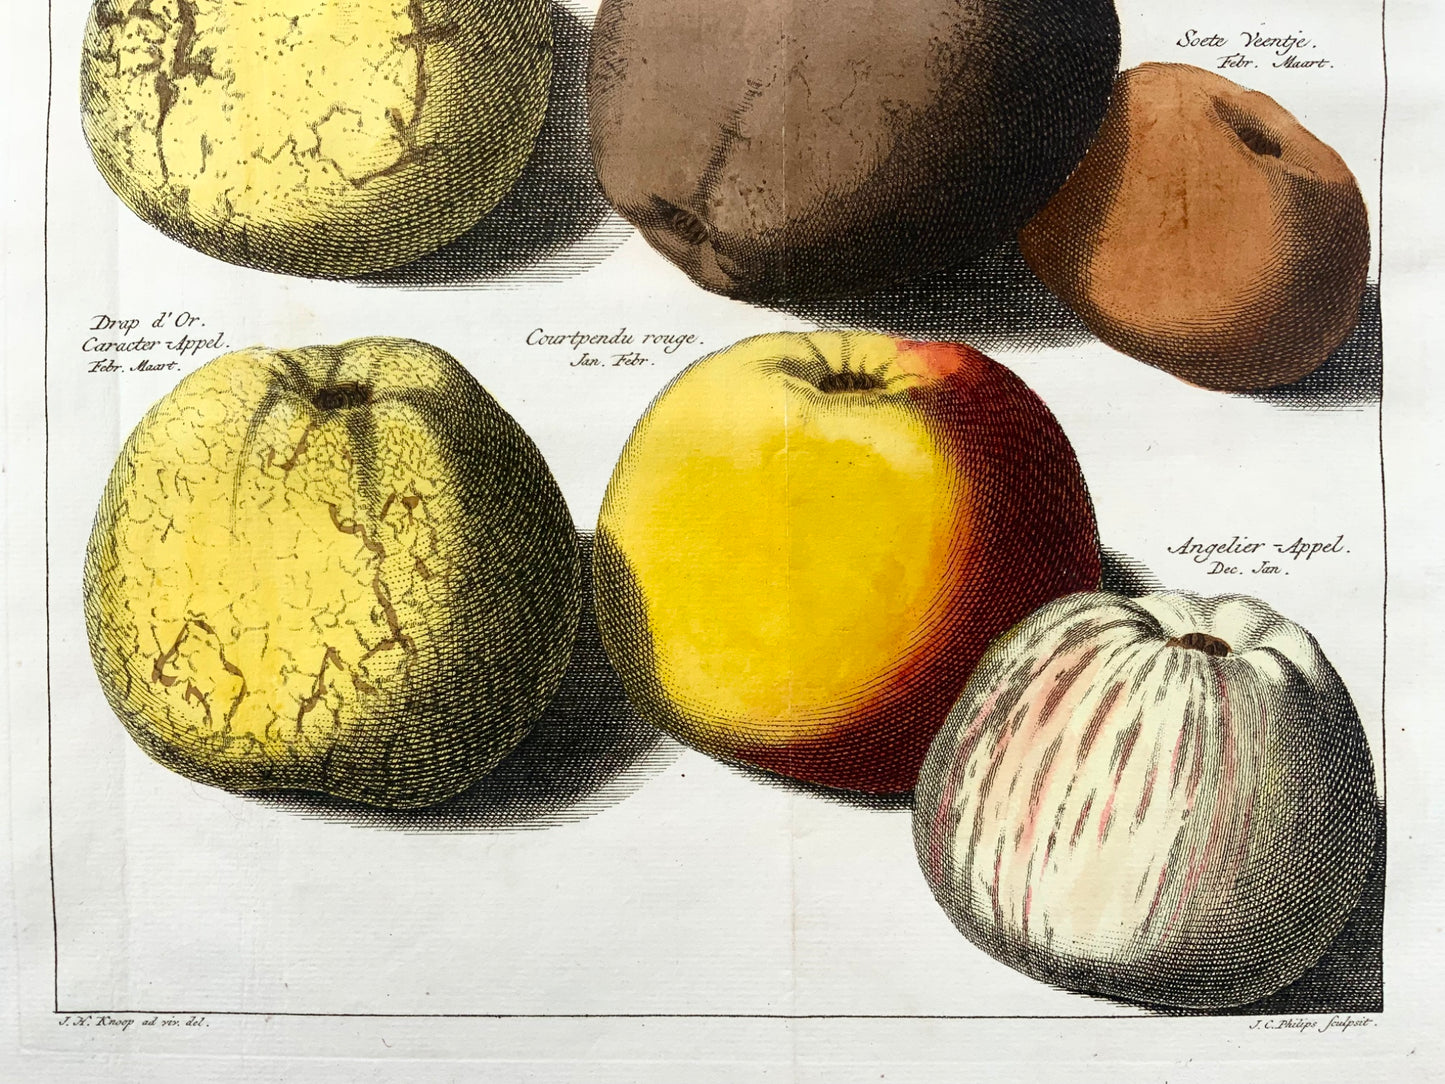 1758 Apples, fruit, folio copper engraving after Knoop by J.C. Philips, botany